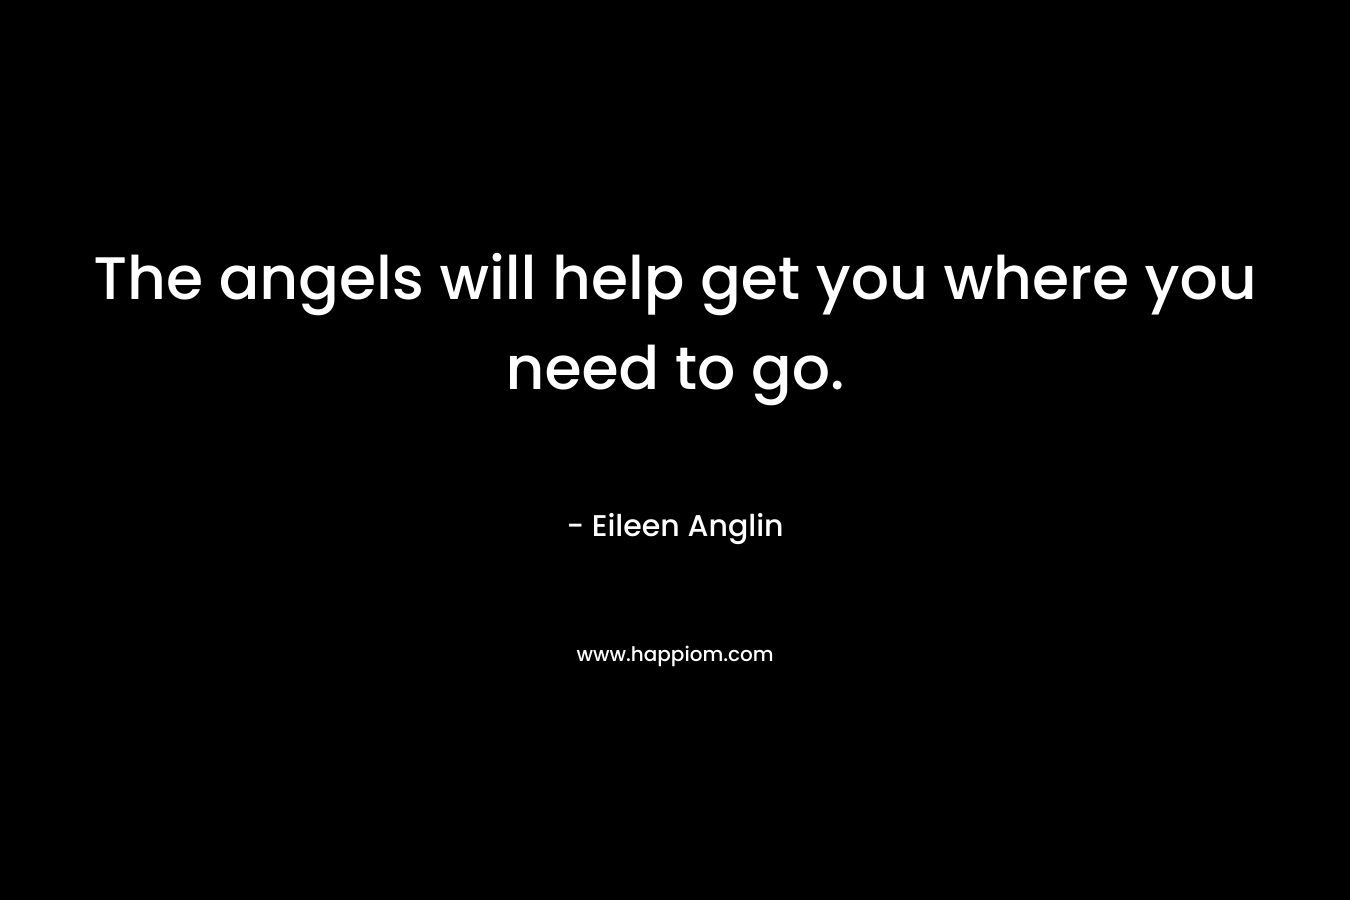 The angels will help get you where you need to go.